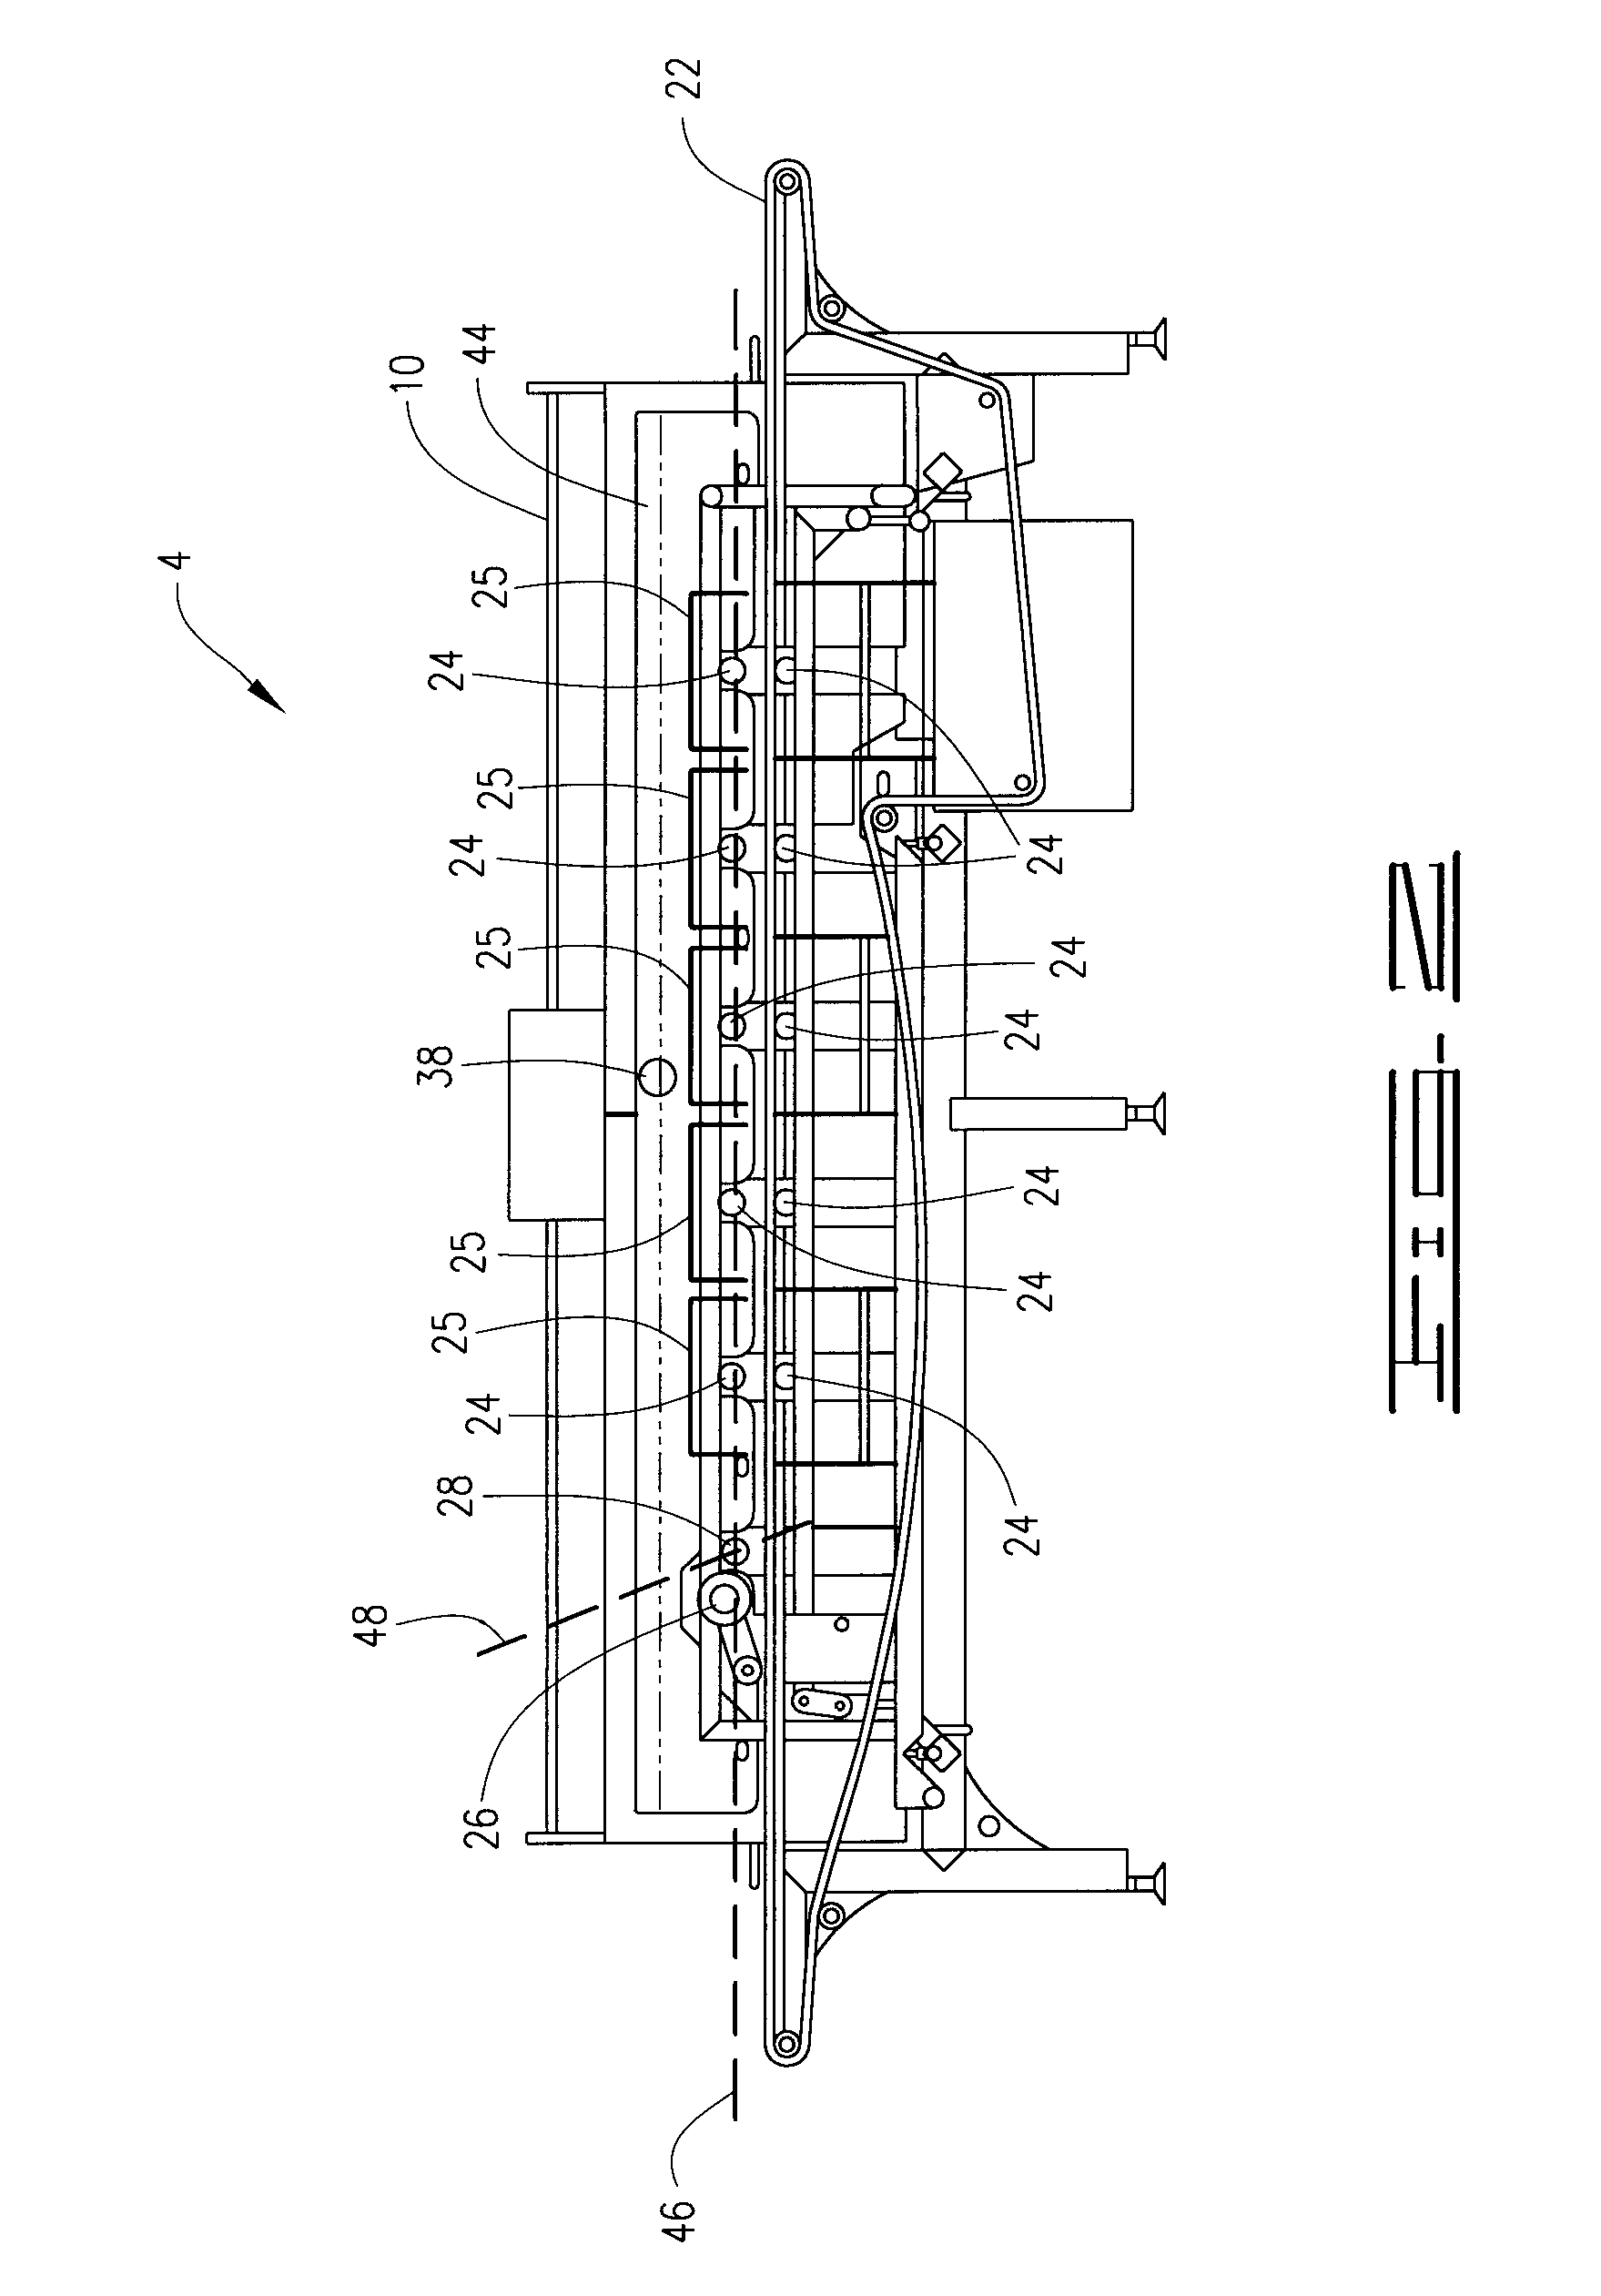 Apparatus and method for searing, branding, and cooking